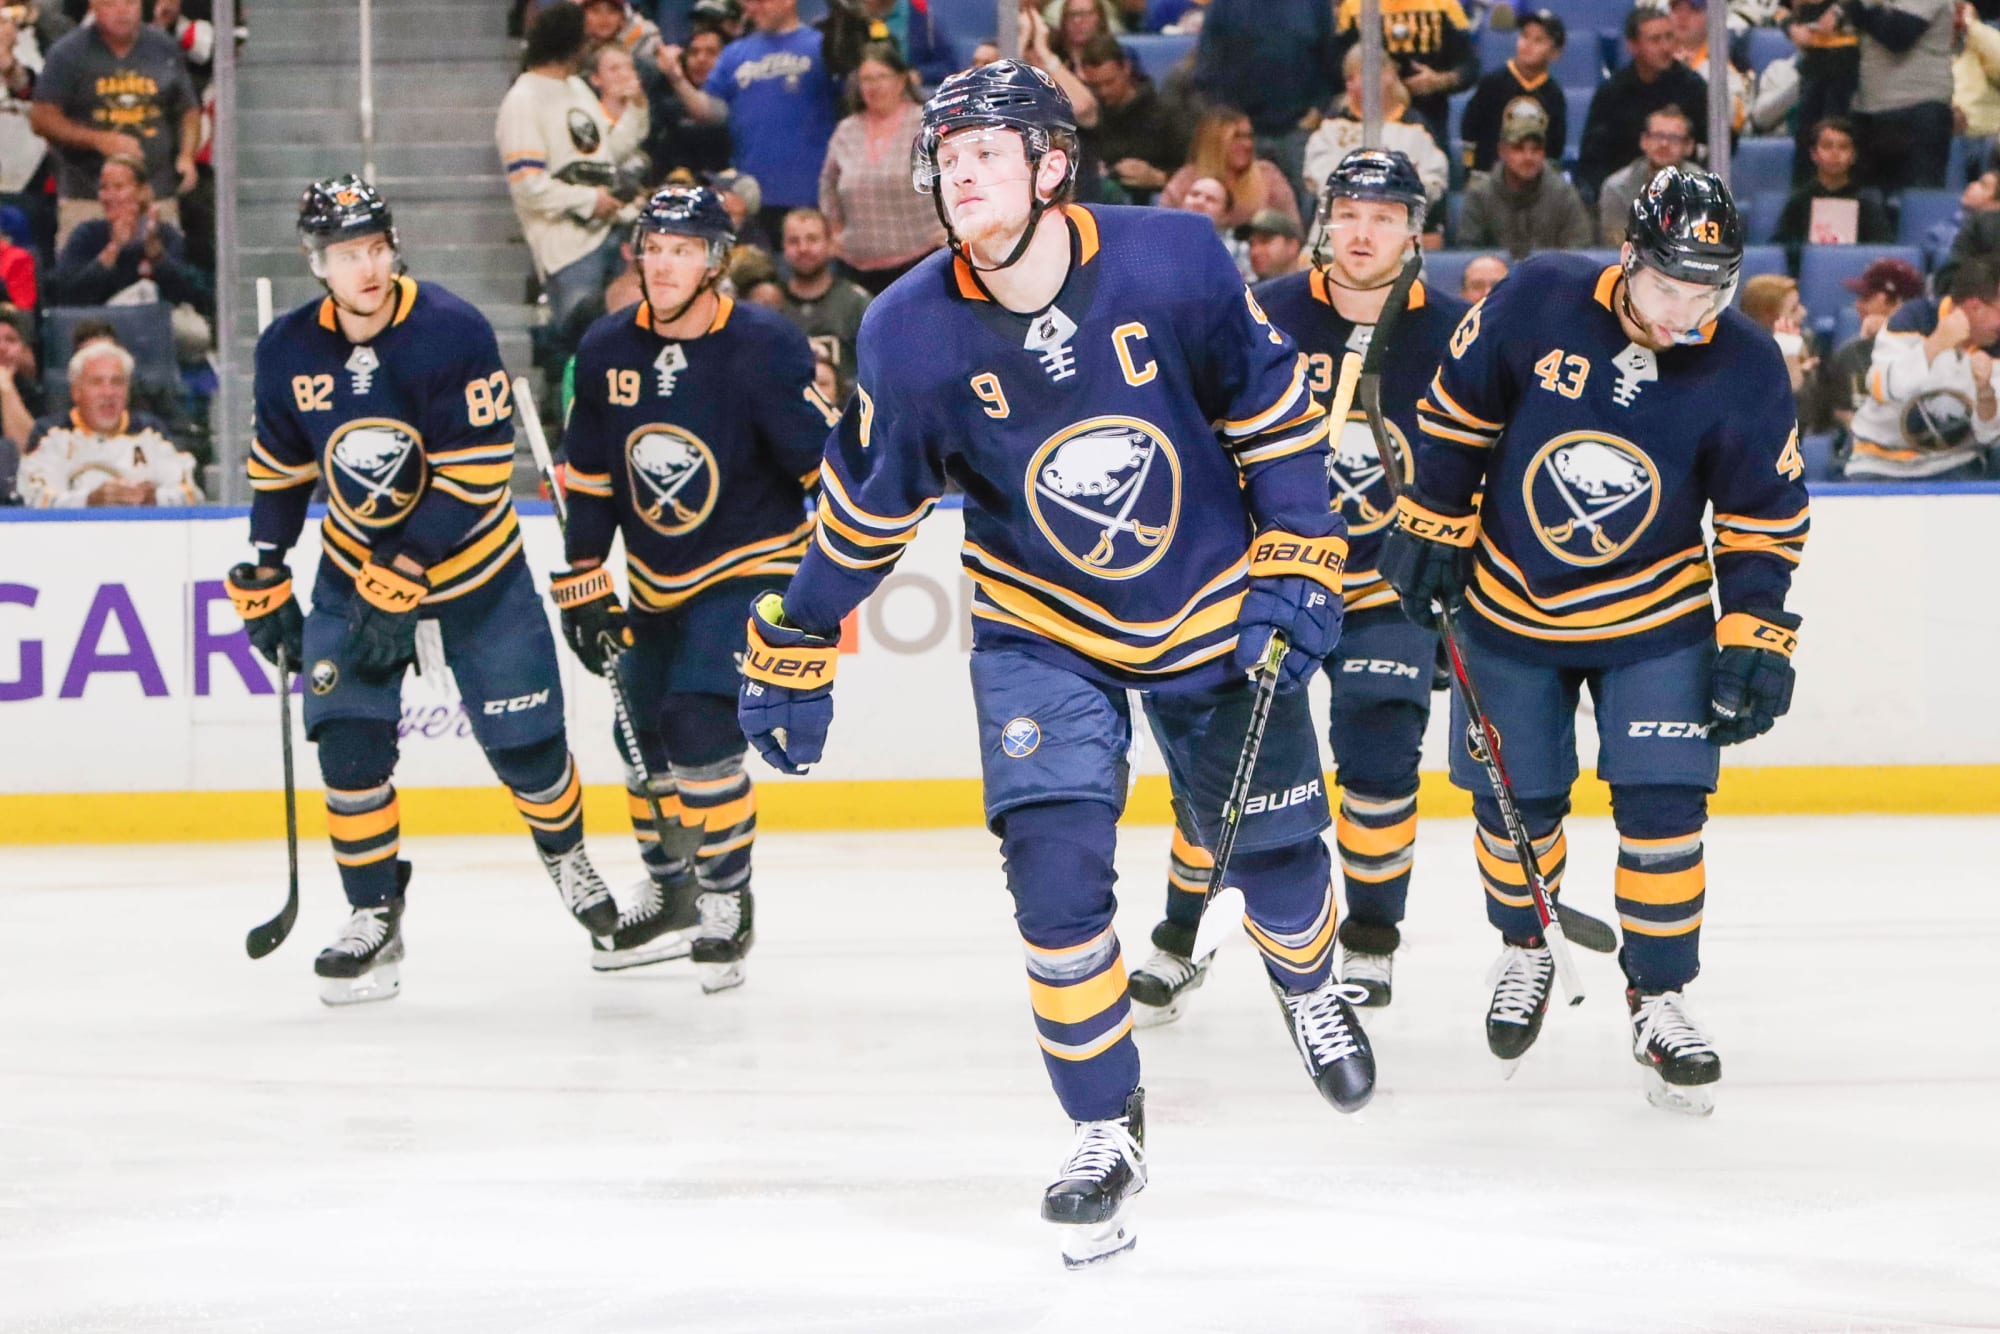 The Buffalo Sabres have a winning record for the first time in 2,081 days